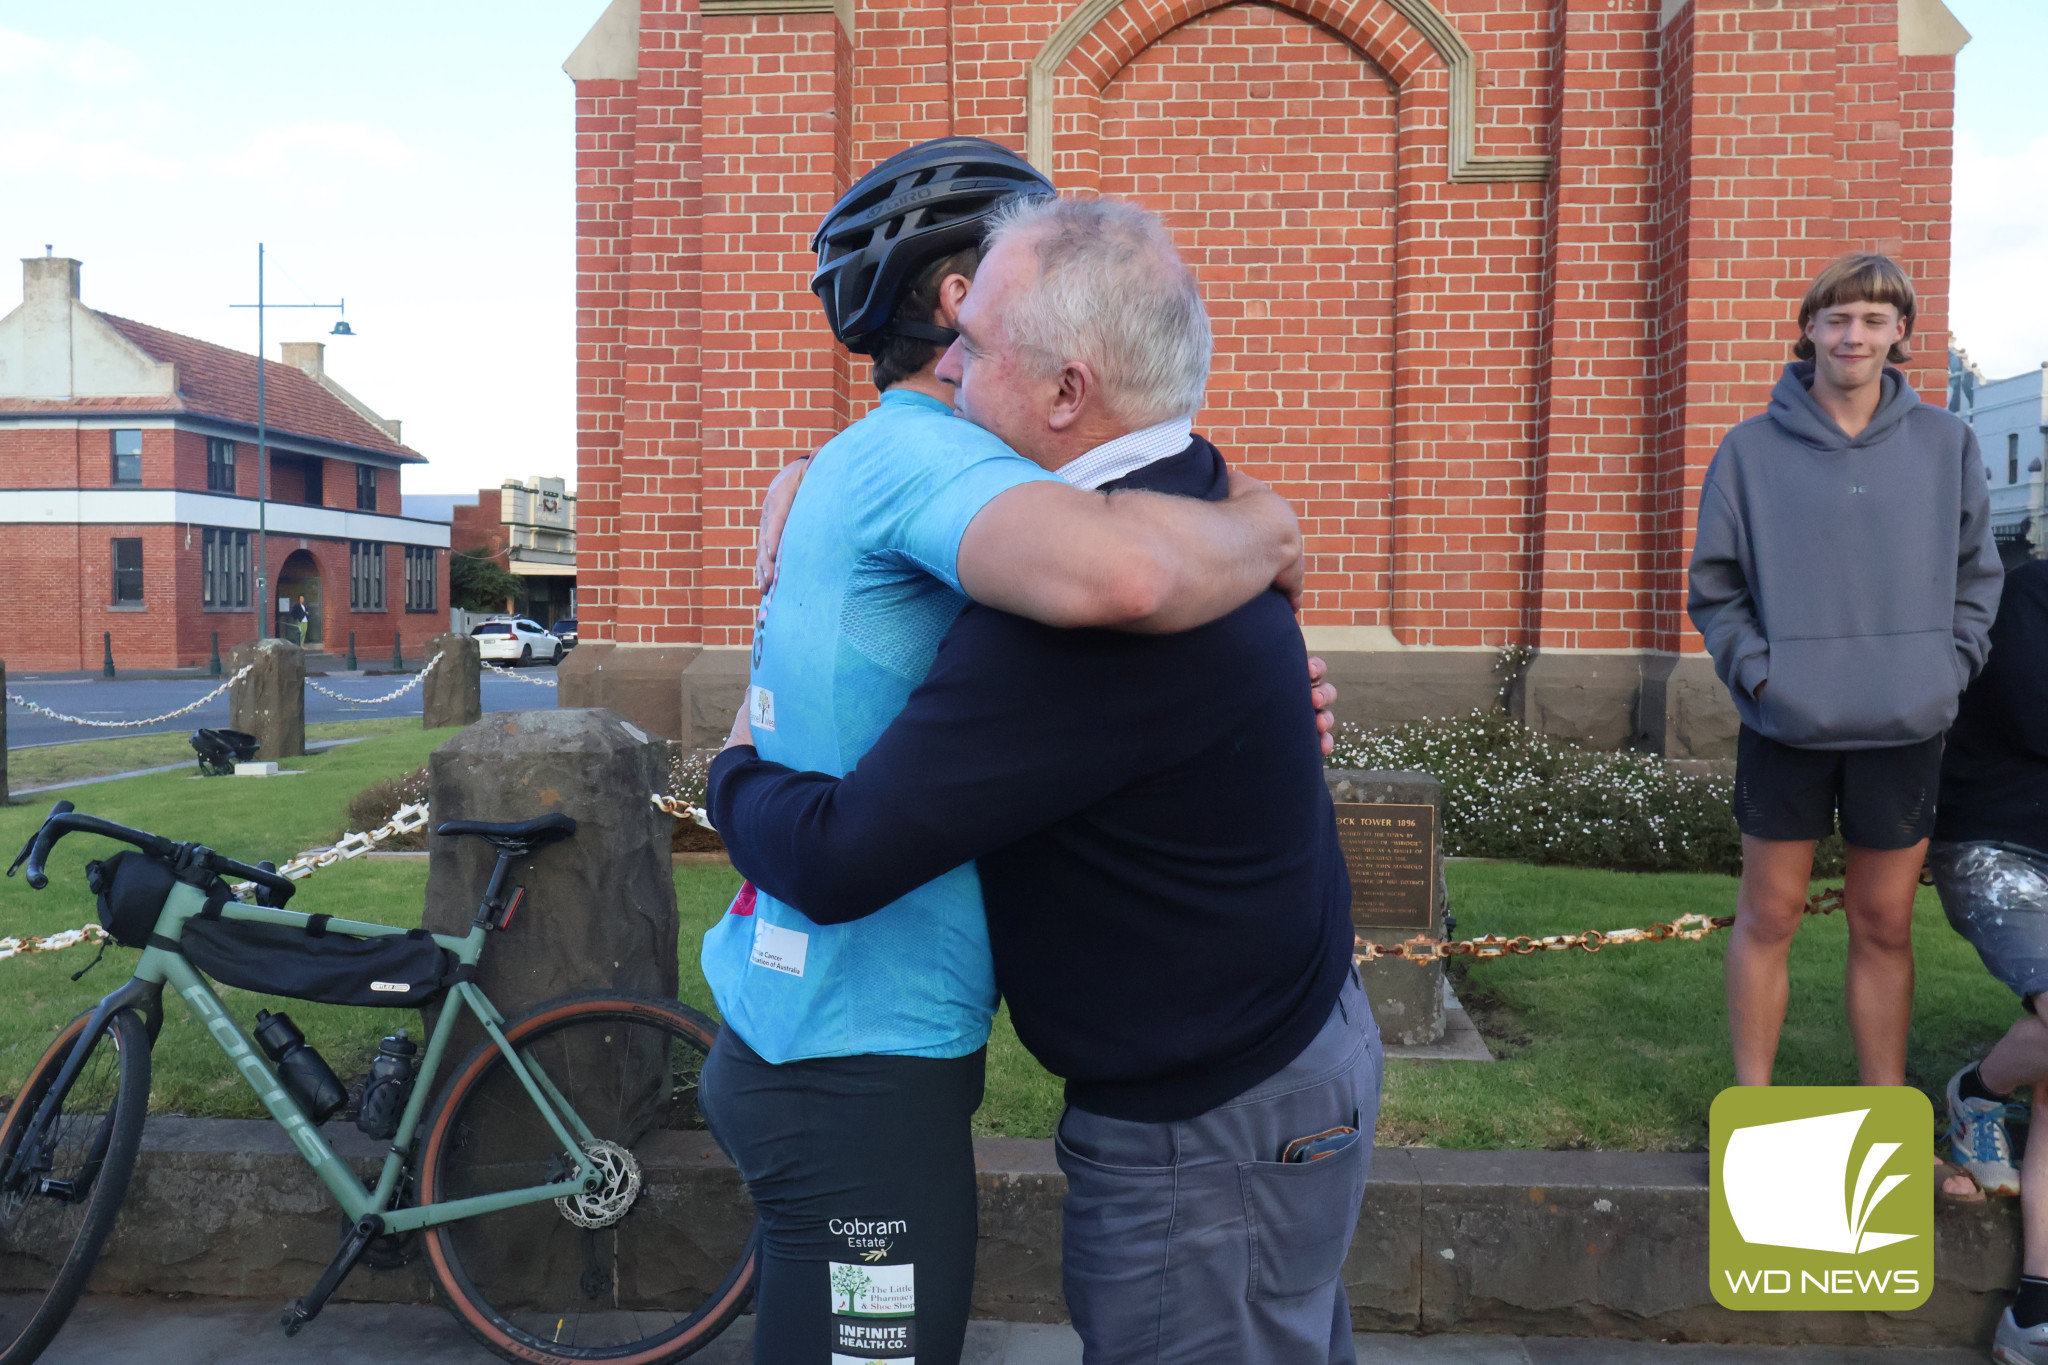 Family love: Jake was greeted by applause and family hugs once he reached the Camperdown Clocktower.